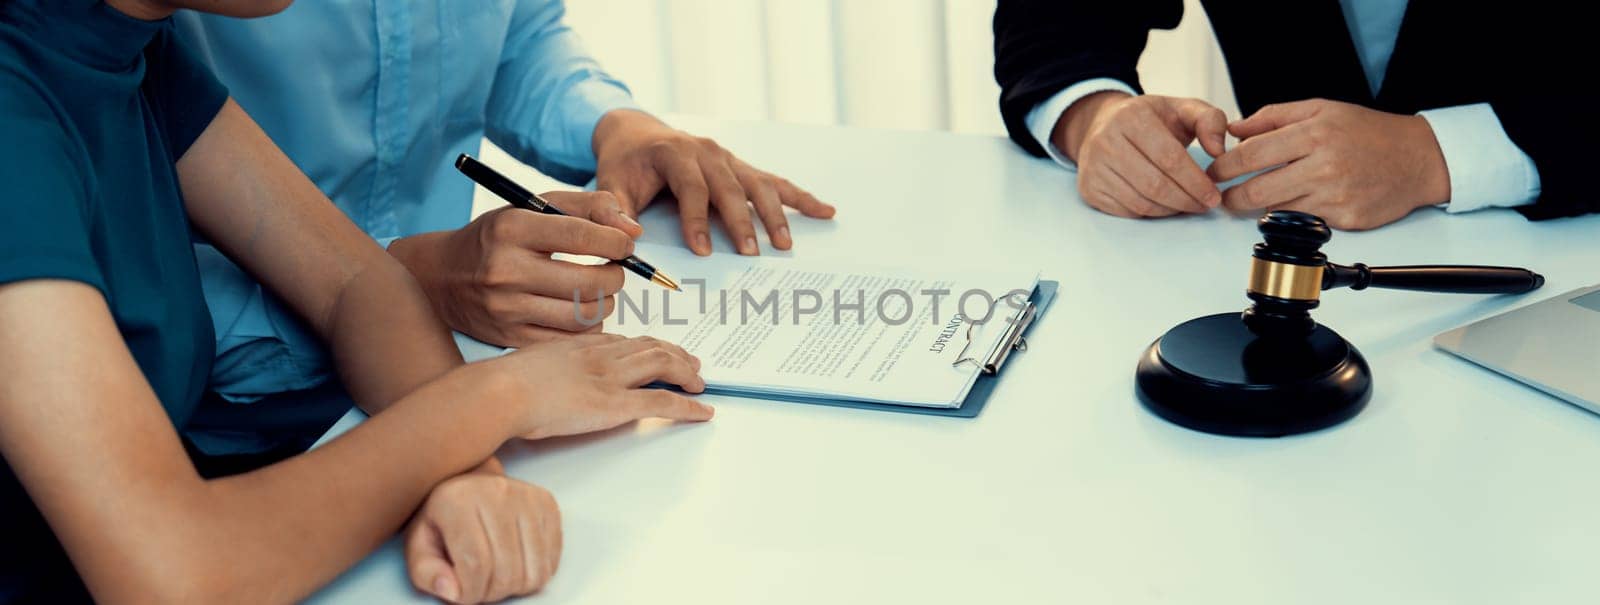 Couples file for divorcing and seek assistance from law firm to divide property after breakup. Obligations contract assist by lawyer in negotiating settlement agreement meeting. Panorama Rigid